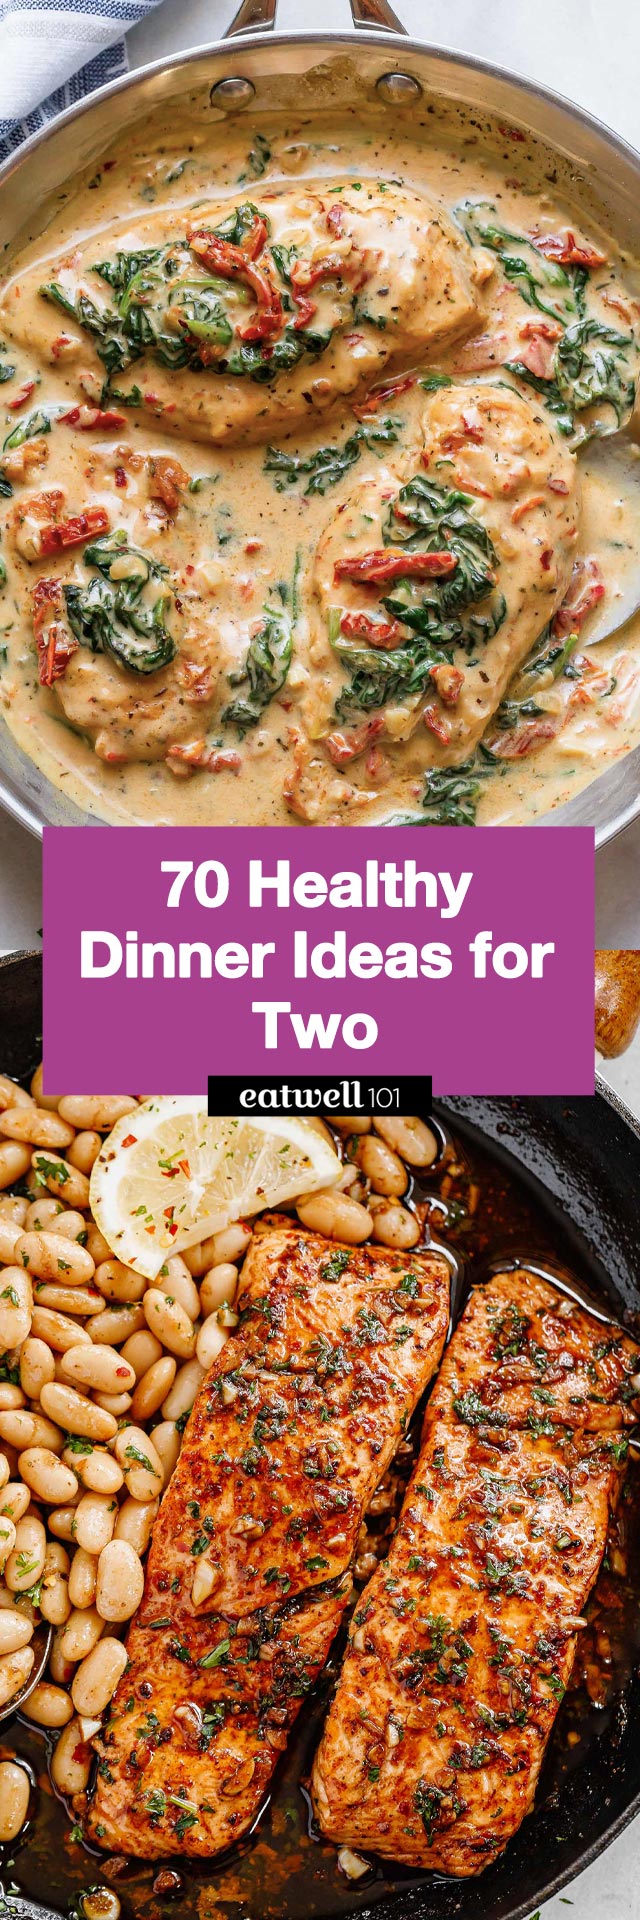 70 Healthy Dinner Ideas for Two - #recipes #dinner #eatwell101 - Cook up a healthy and satisfying dinner without all the extra leftovers. These healthy recipes for two are perfect for the job!